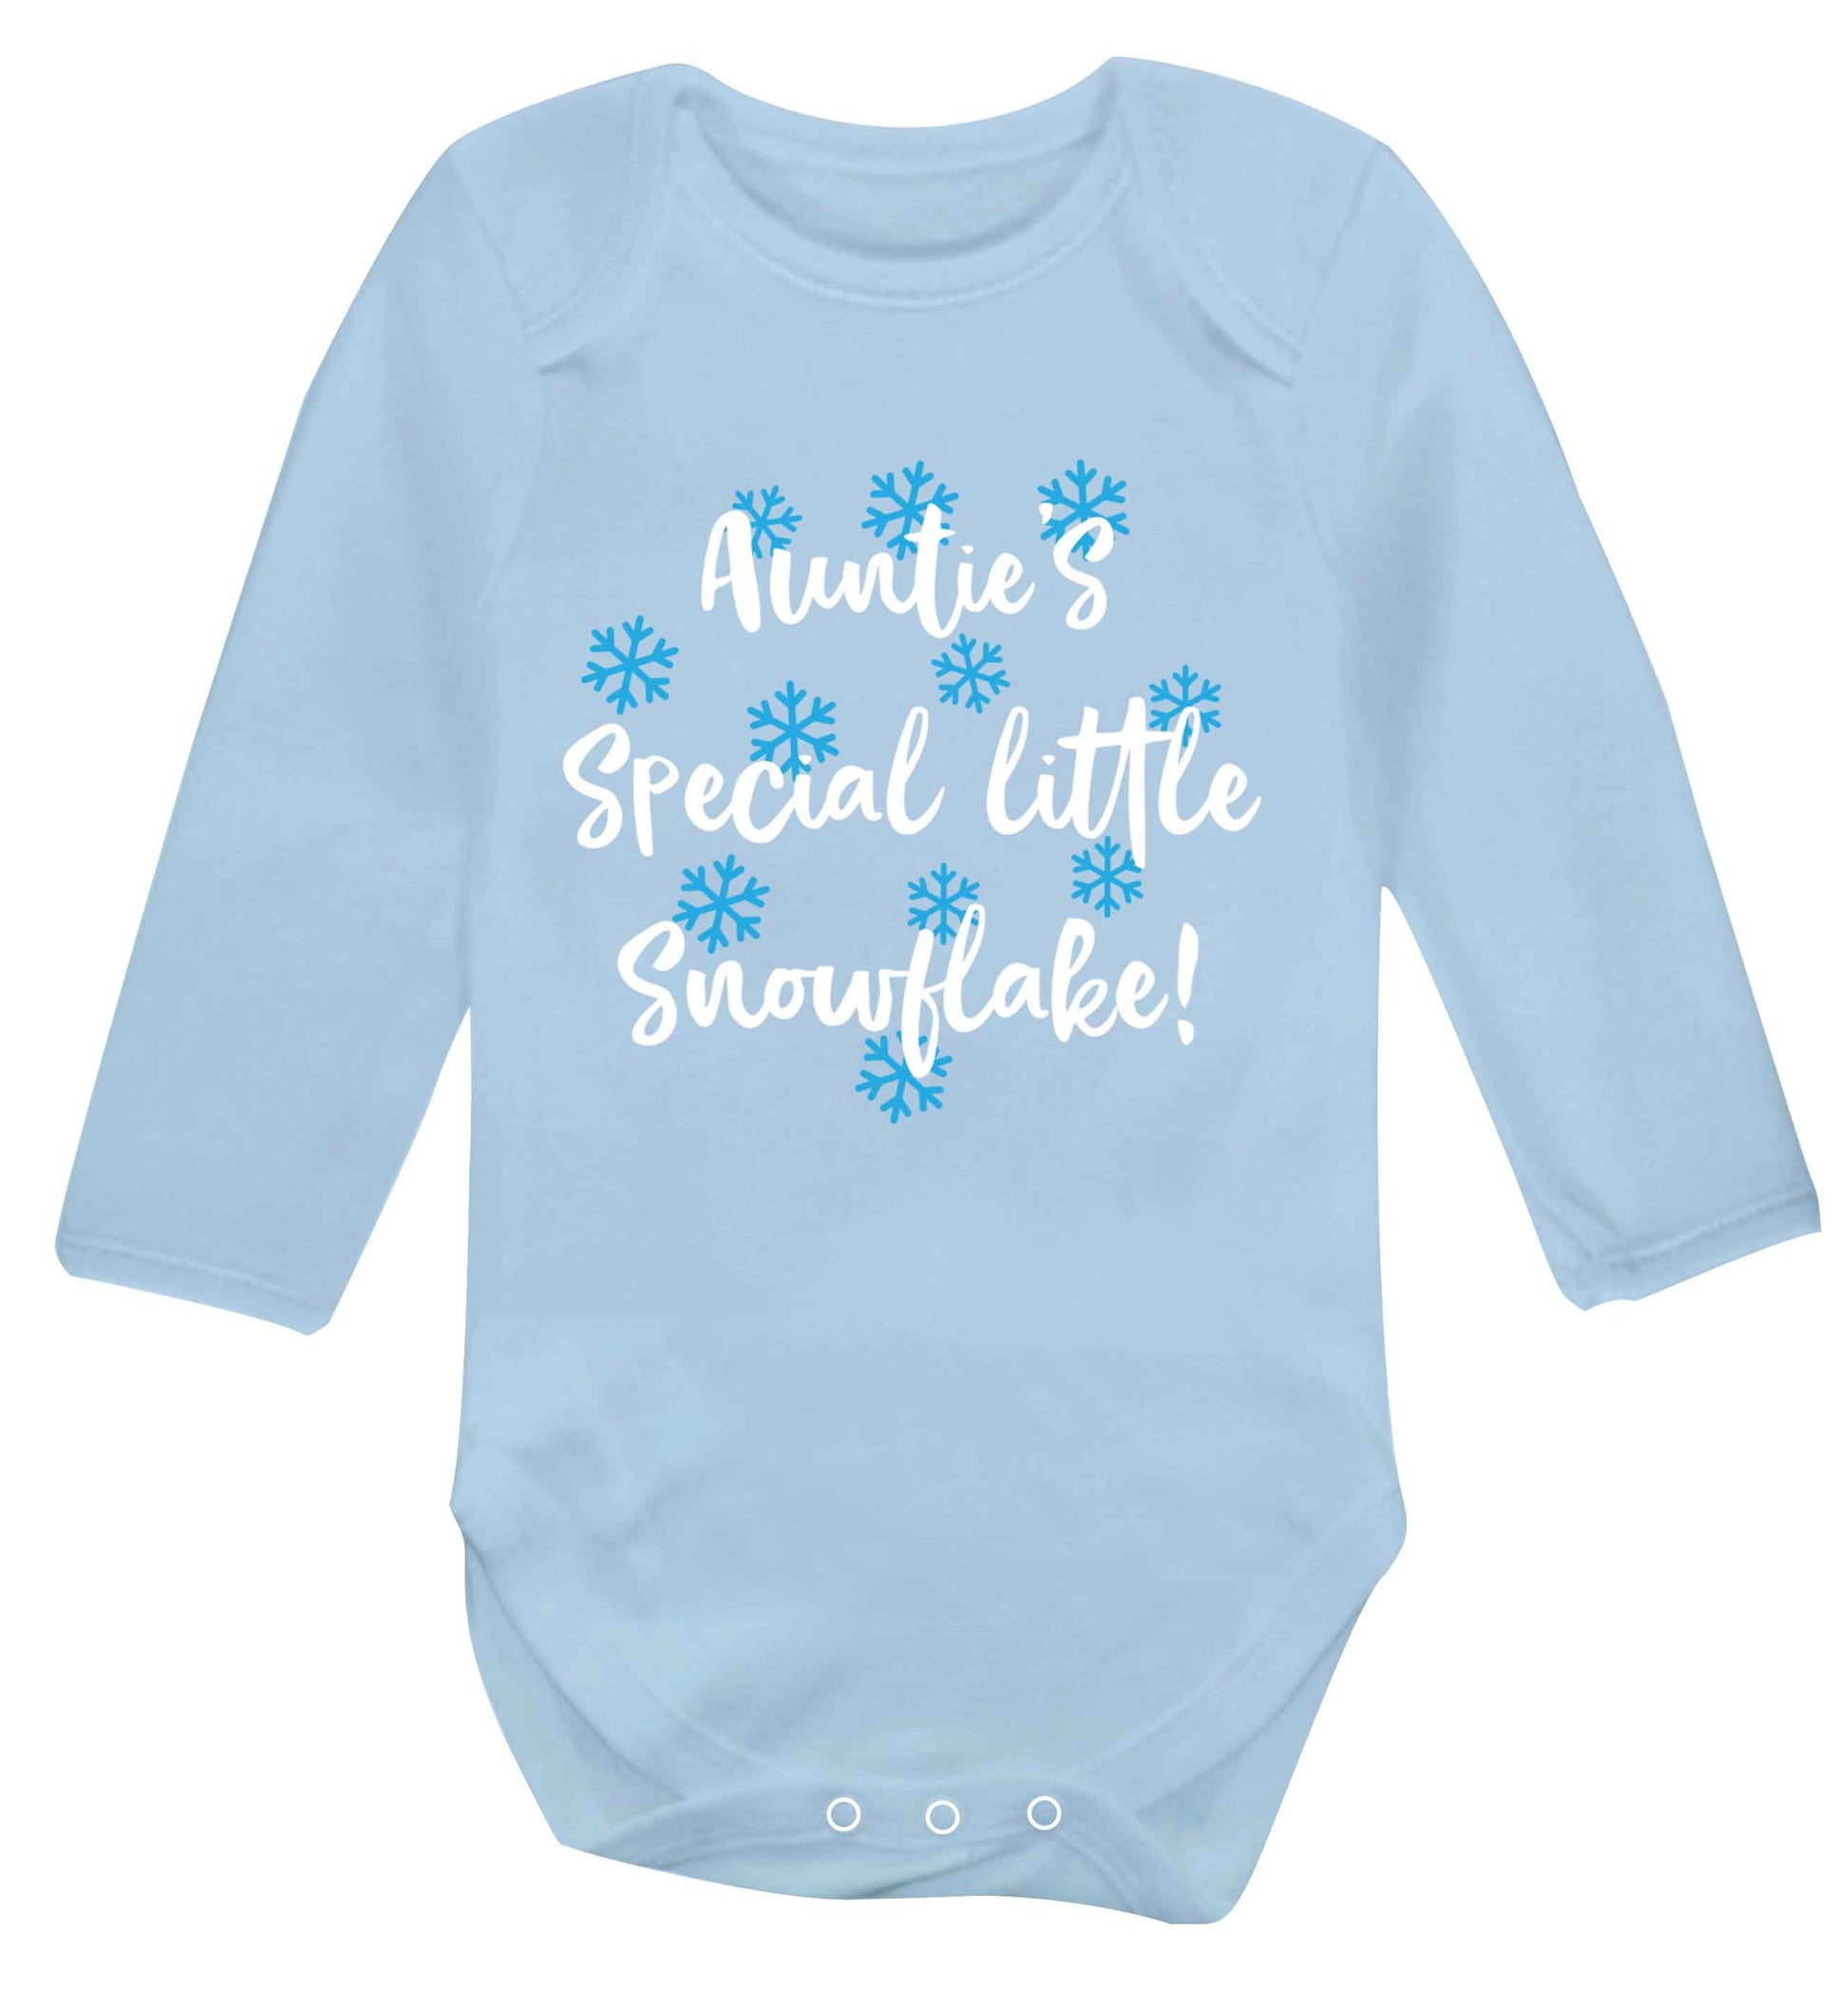 Auntie's special little snowflake Baby Vest long sleeved pale blue 6-12 months